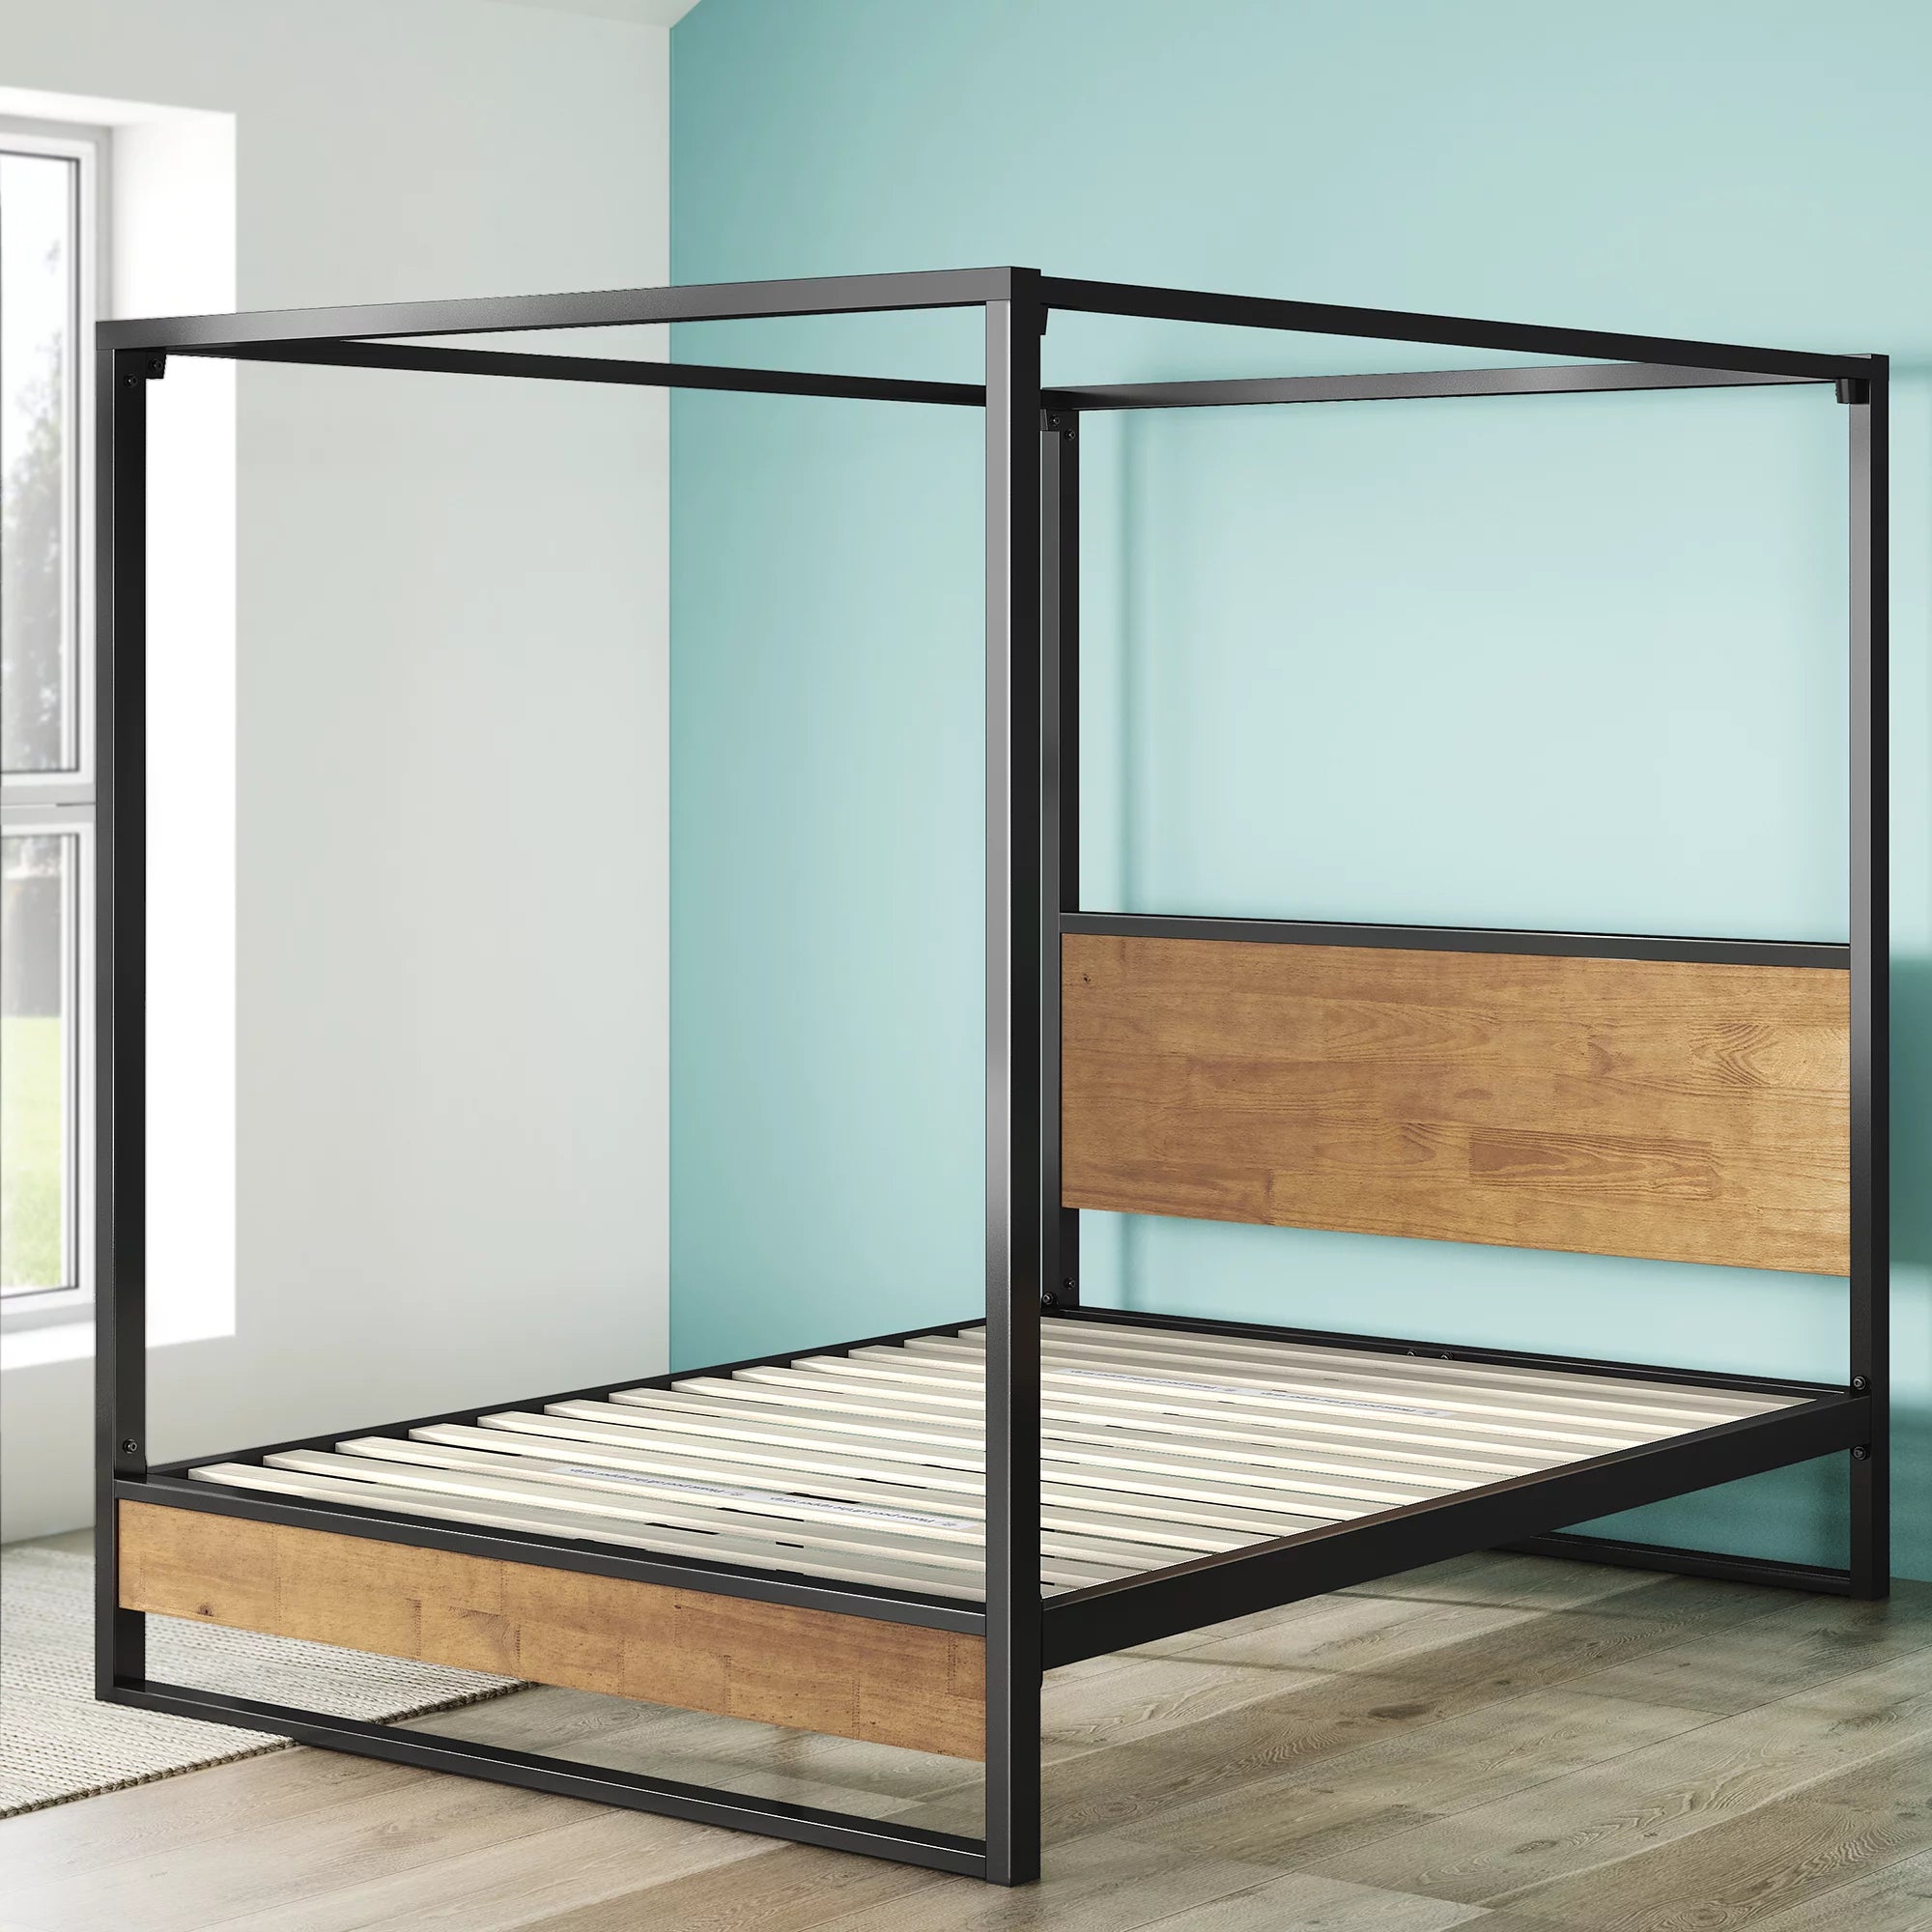 Suzanne Brown Metal and Wood Full Canopy Platform Bed Frame - $200